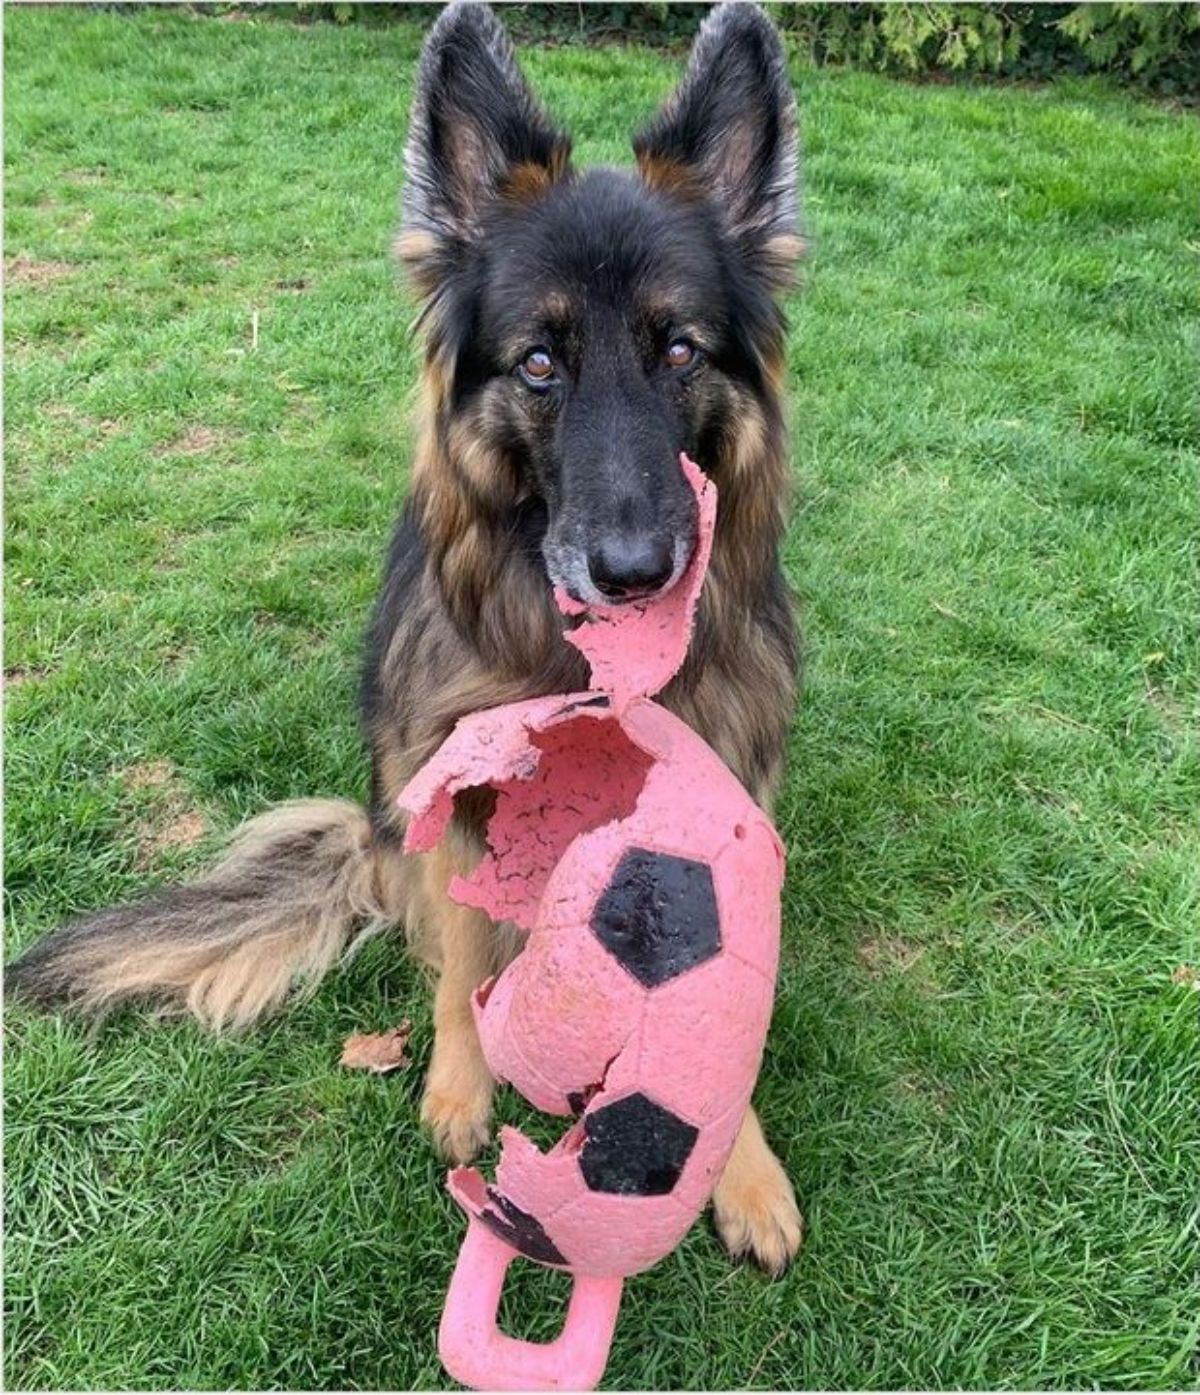 fluffy black and brown dog sitting on grass holding torn up pink and black football